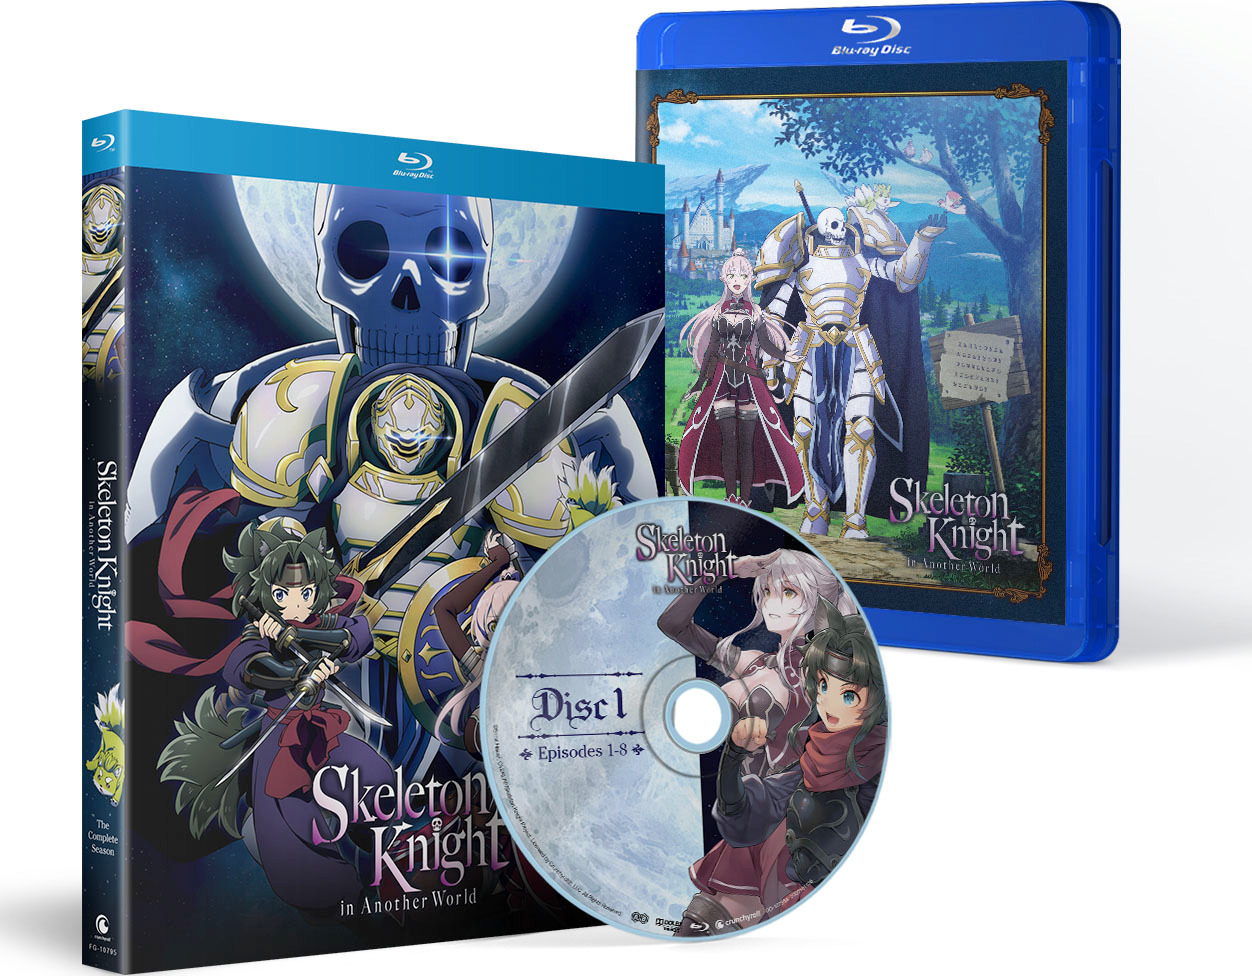 Skeleton Knight in Another World: The Complete Season [Blu-ray]